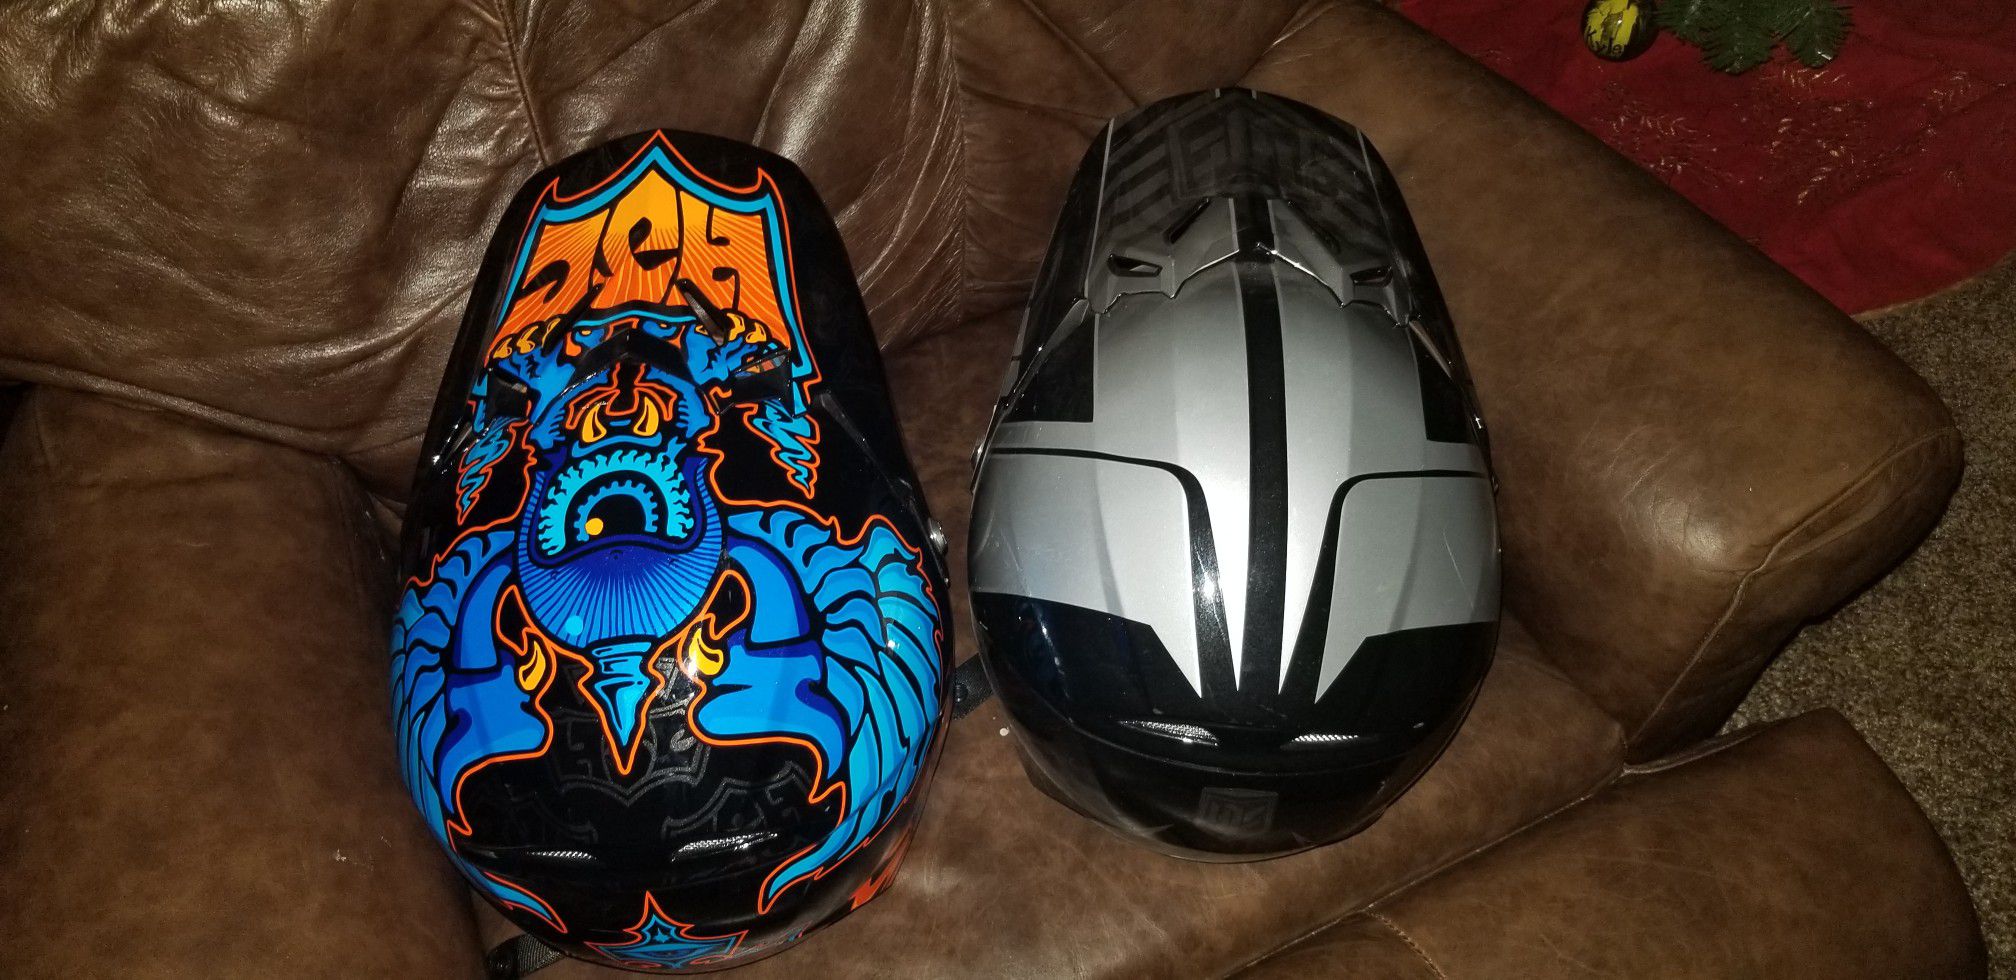 2 youth helmets xl and large